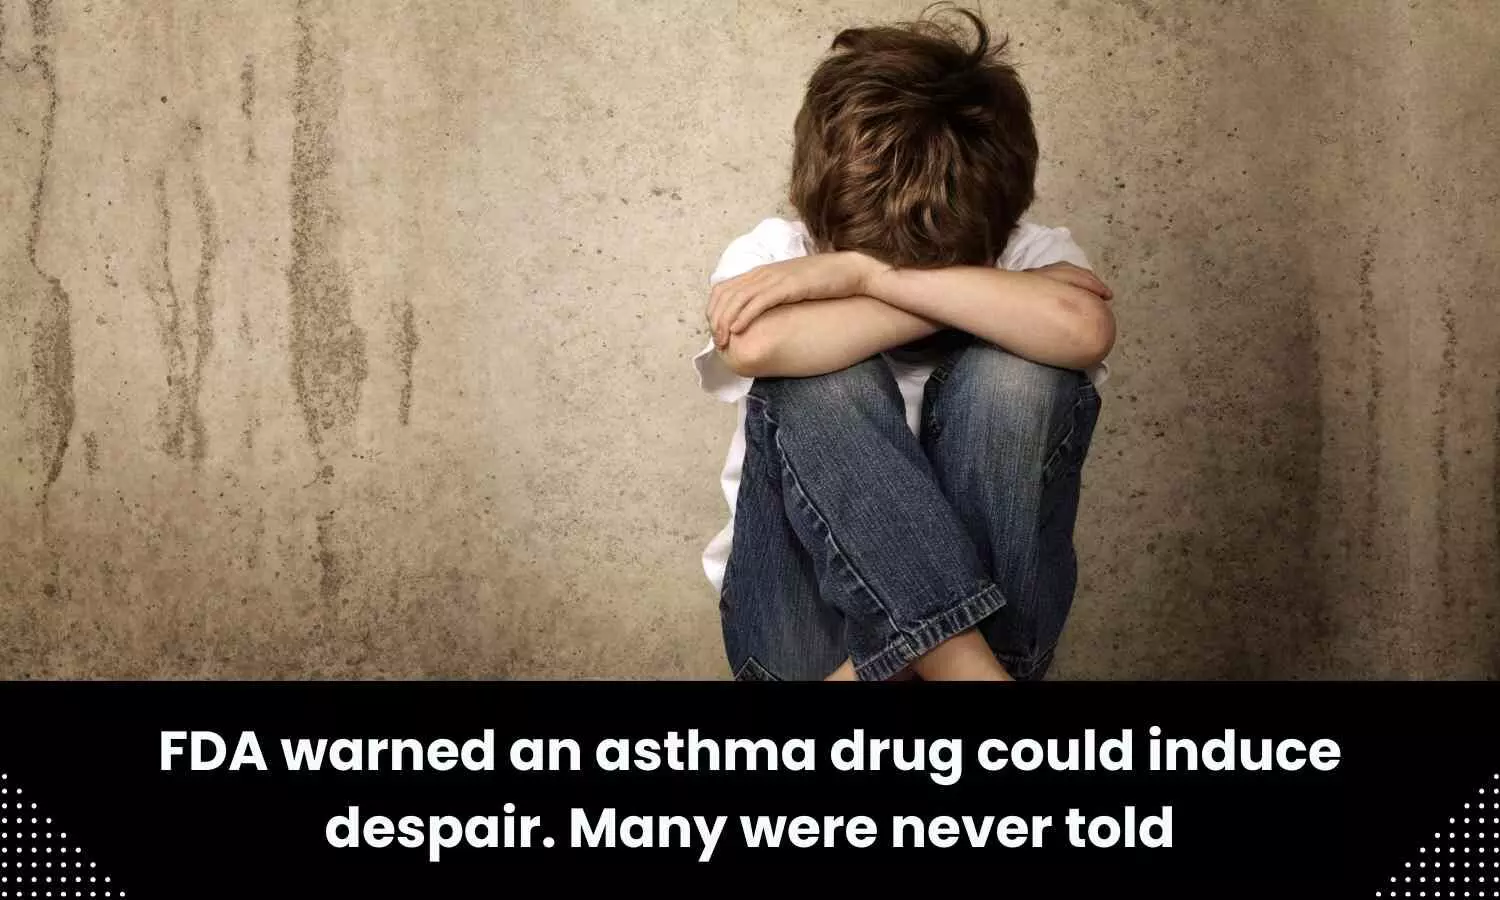 The FDA warned an asthma drug could induce despair. Many were never told